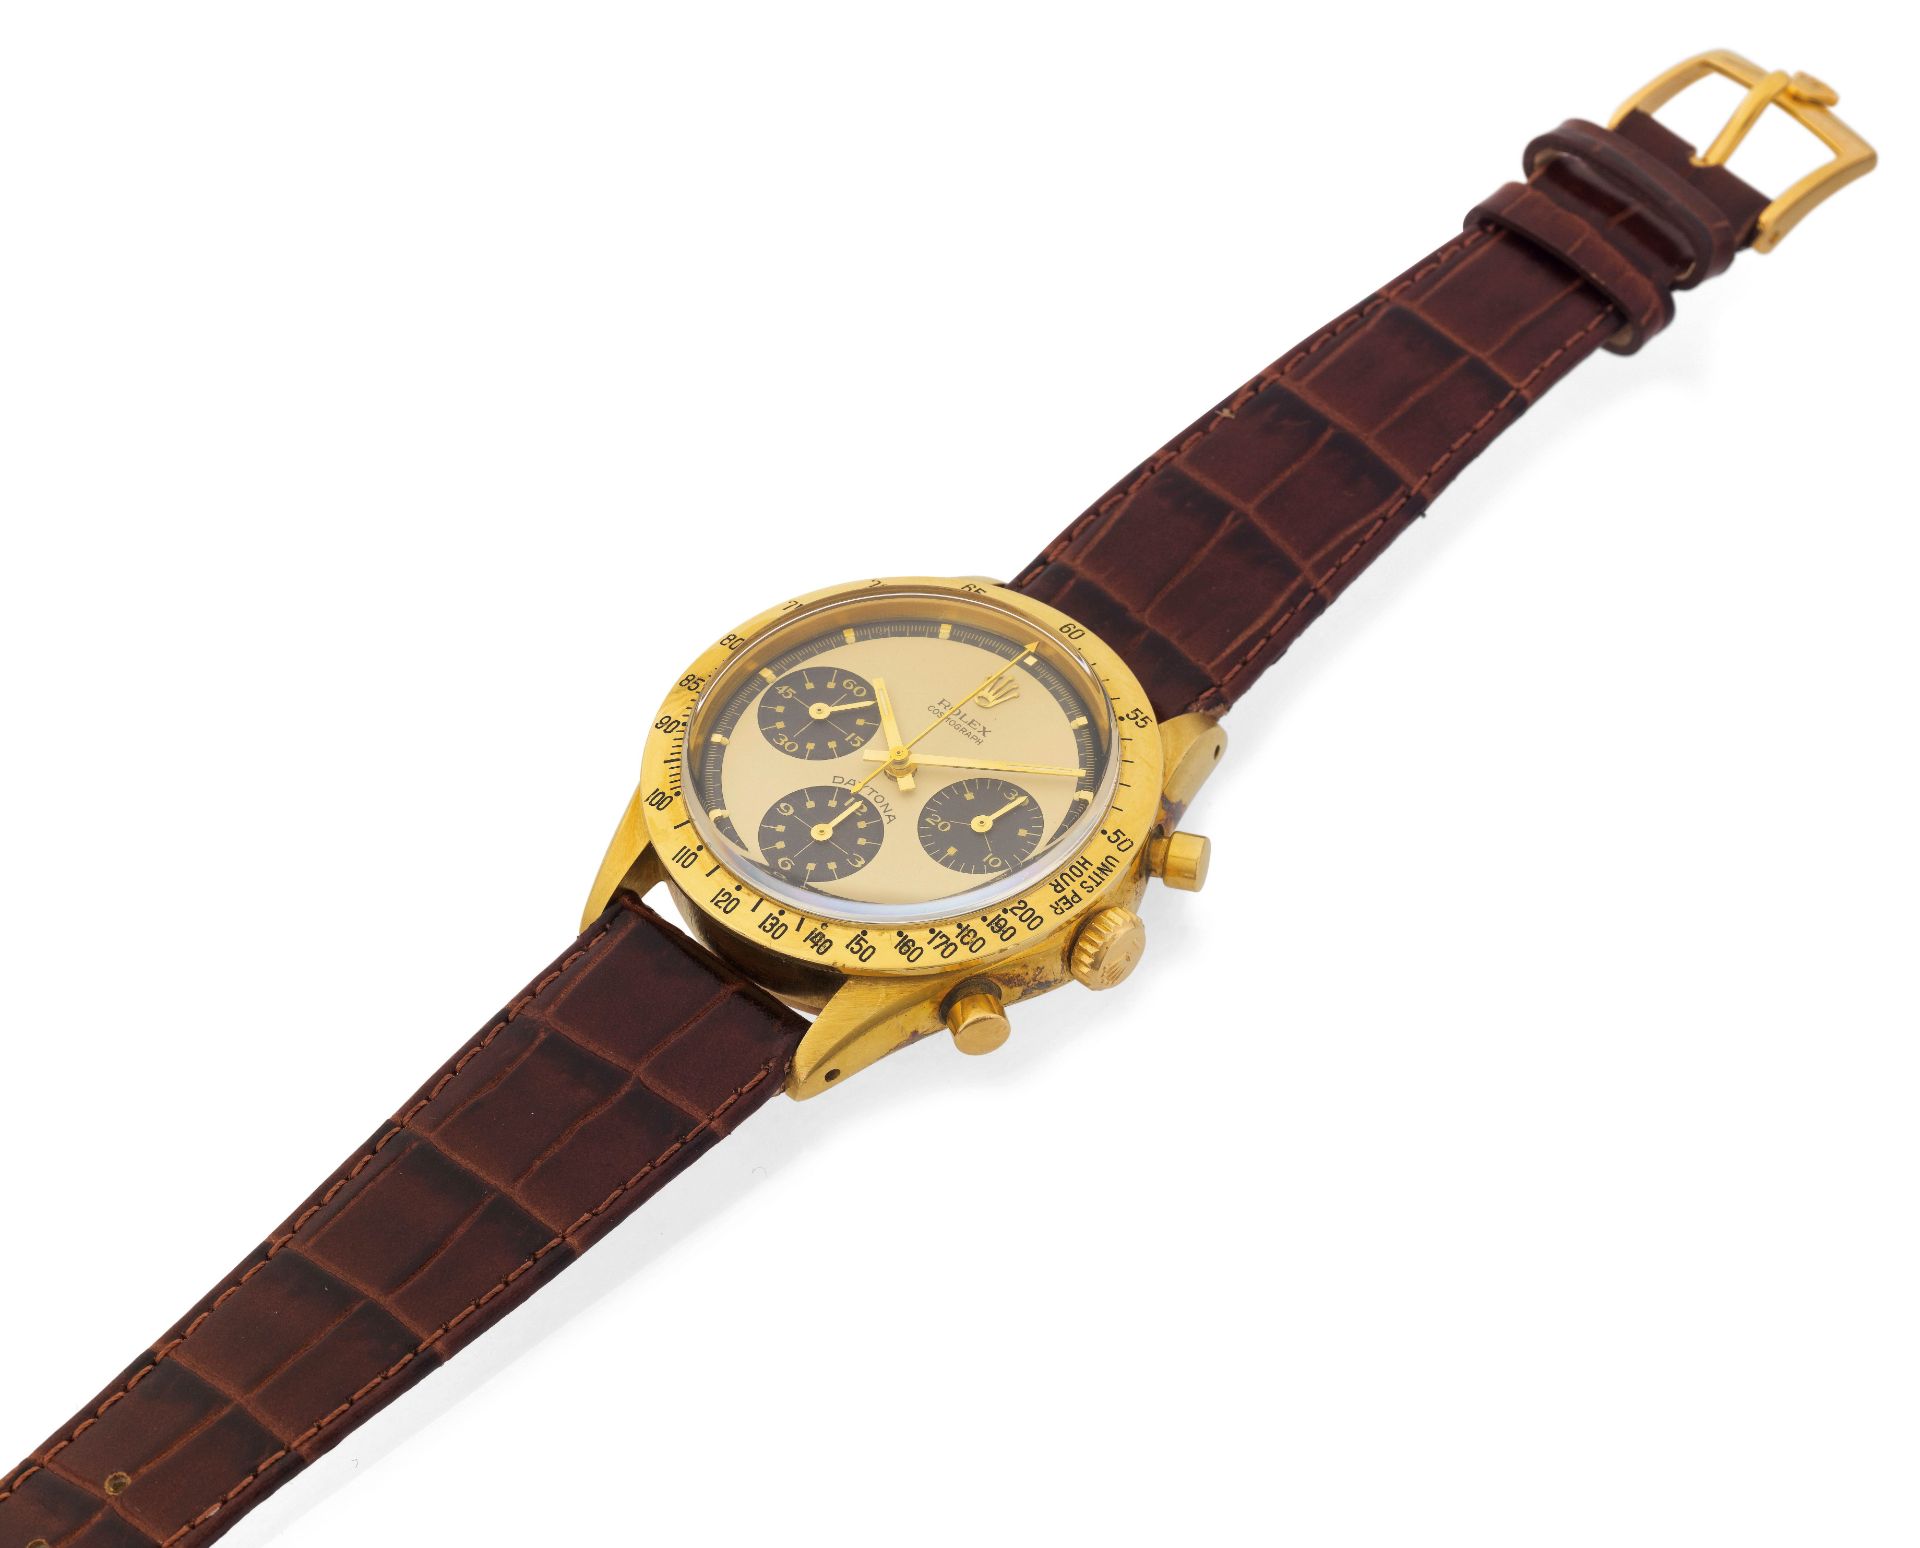 Rolex, very rare "Paul Newman" Daytona in exceptional condition, ca. 1968. - Image 2 of 9